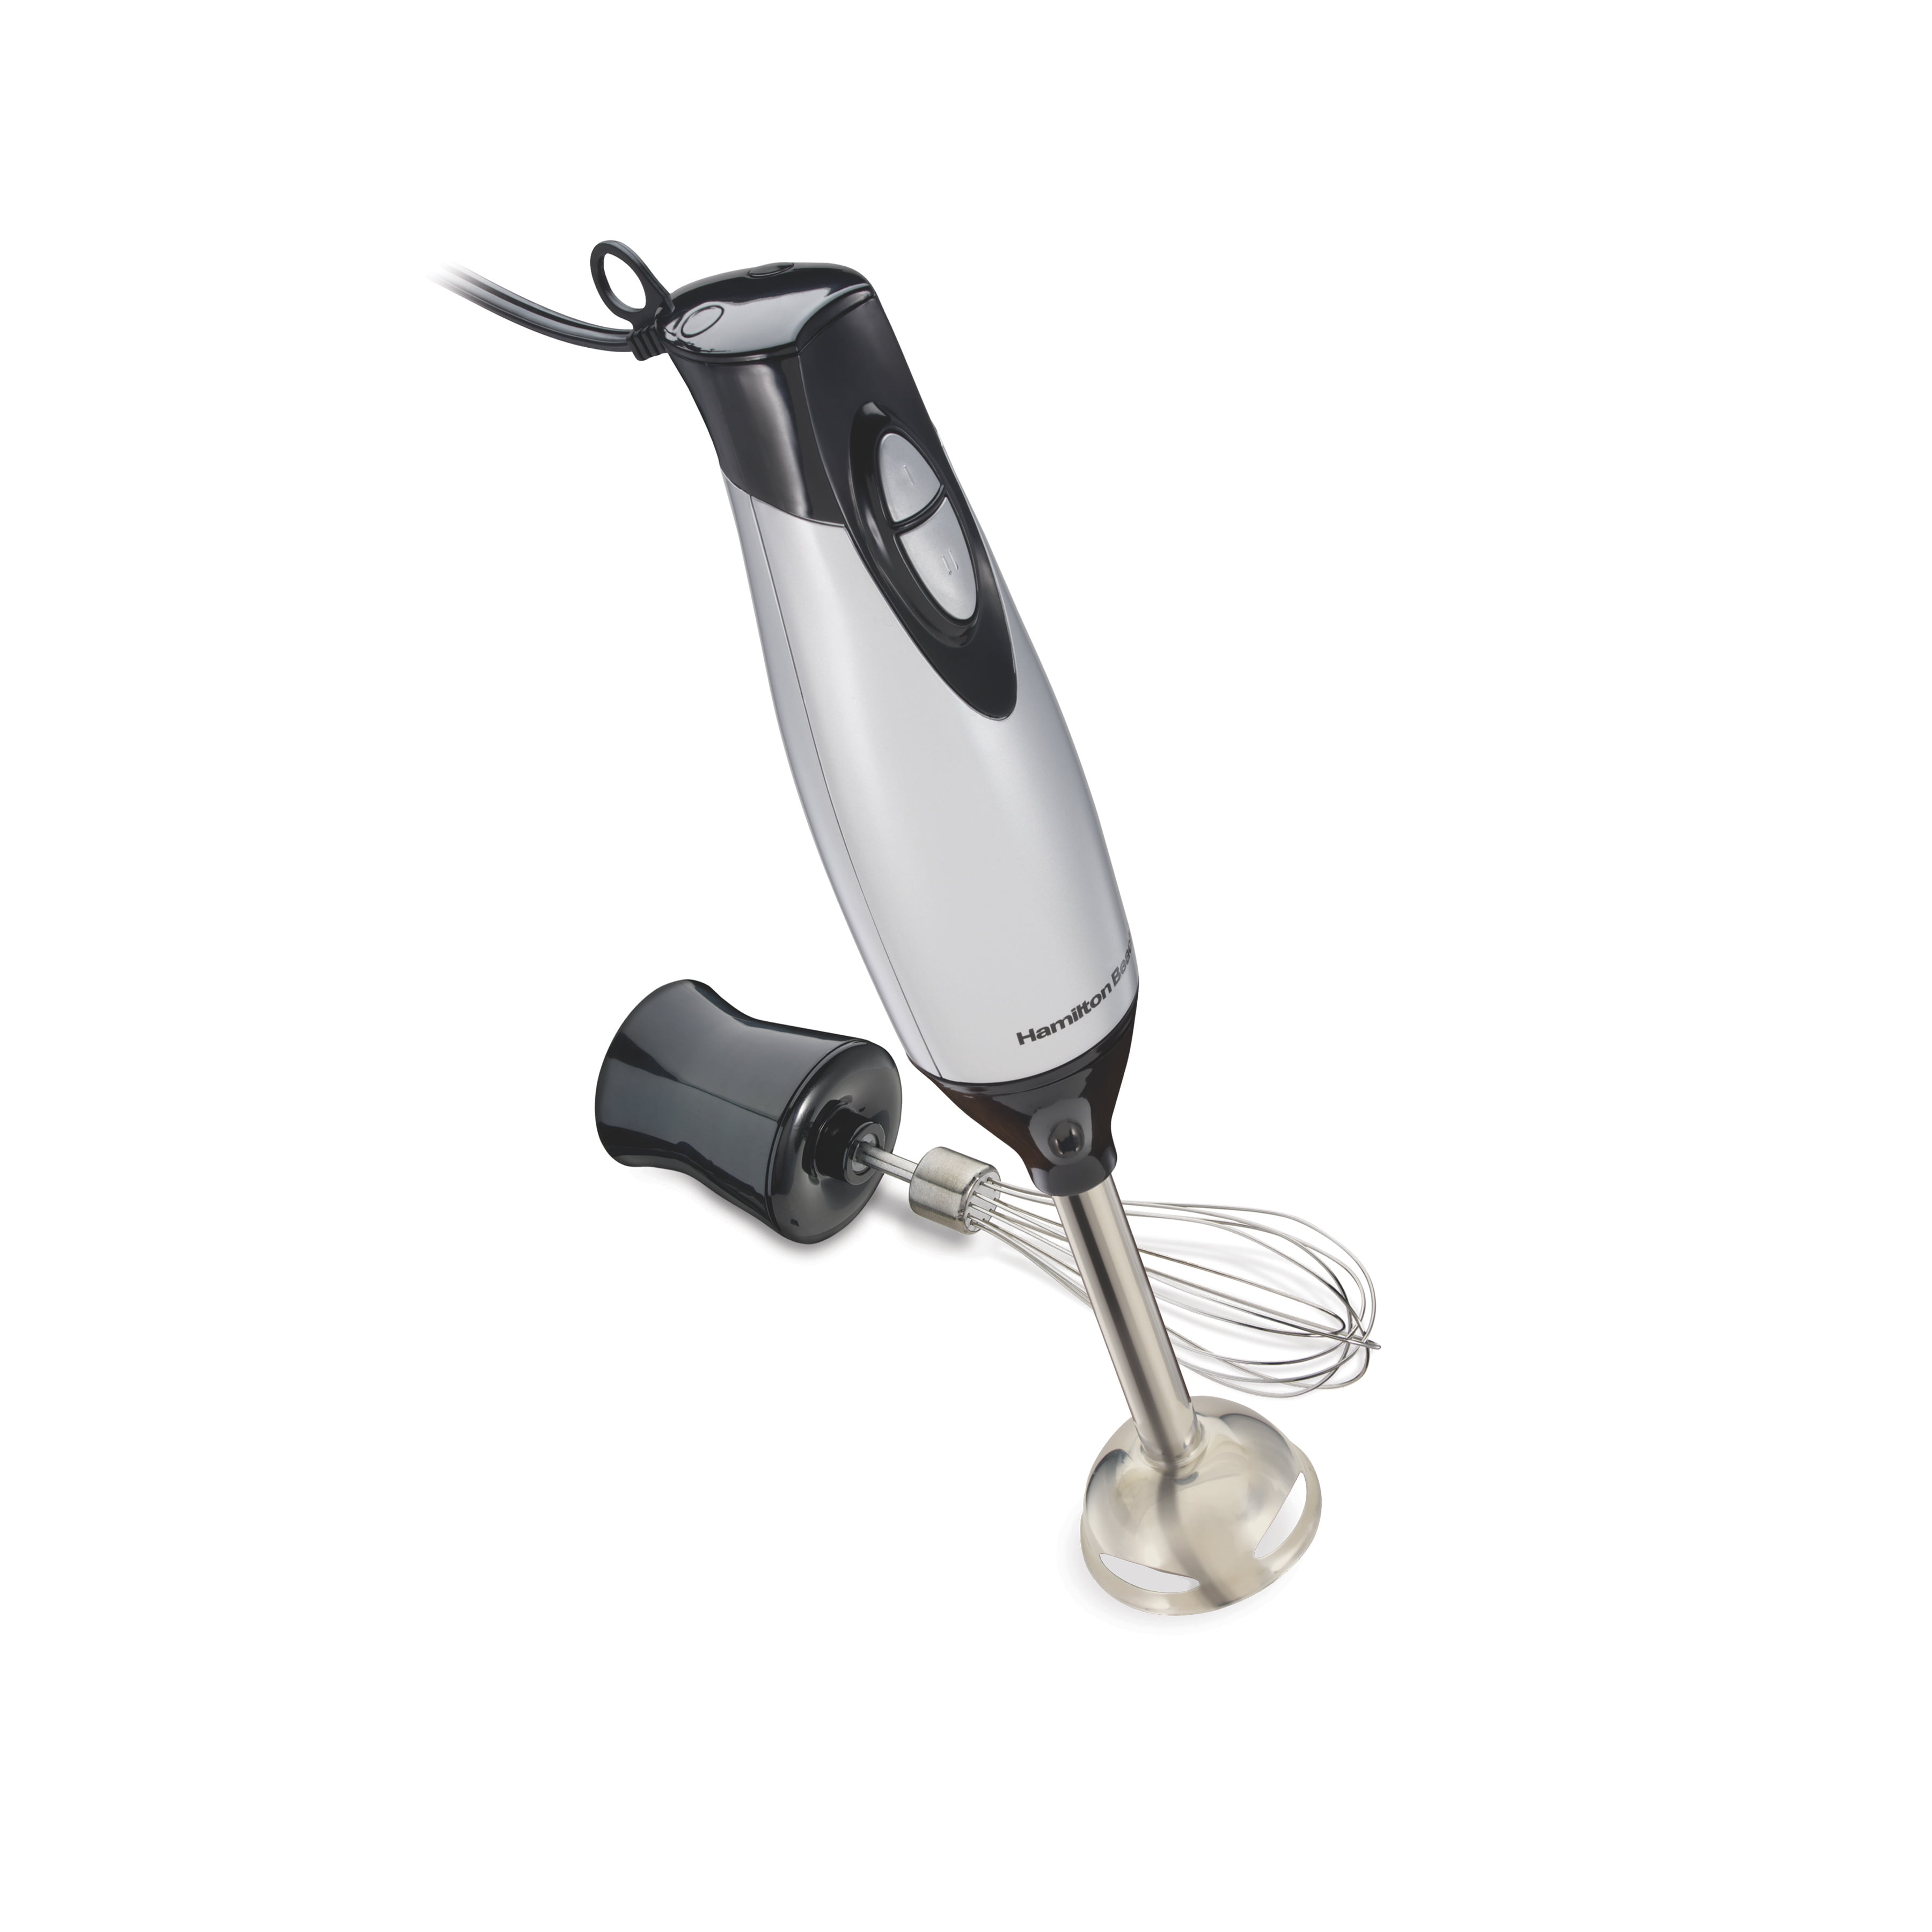 The 15 Absolute Best Uses For Your Immersion Blender